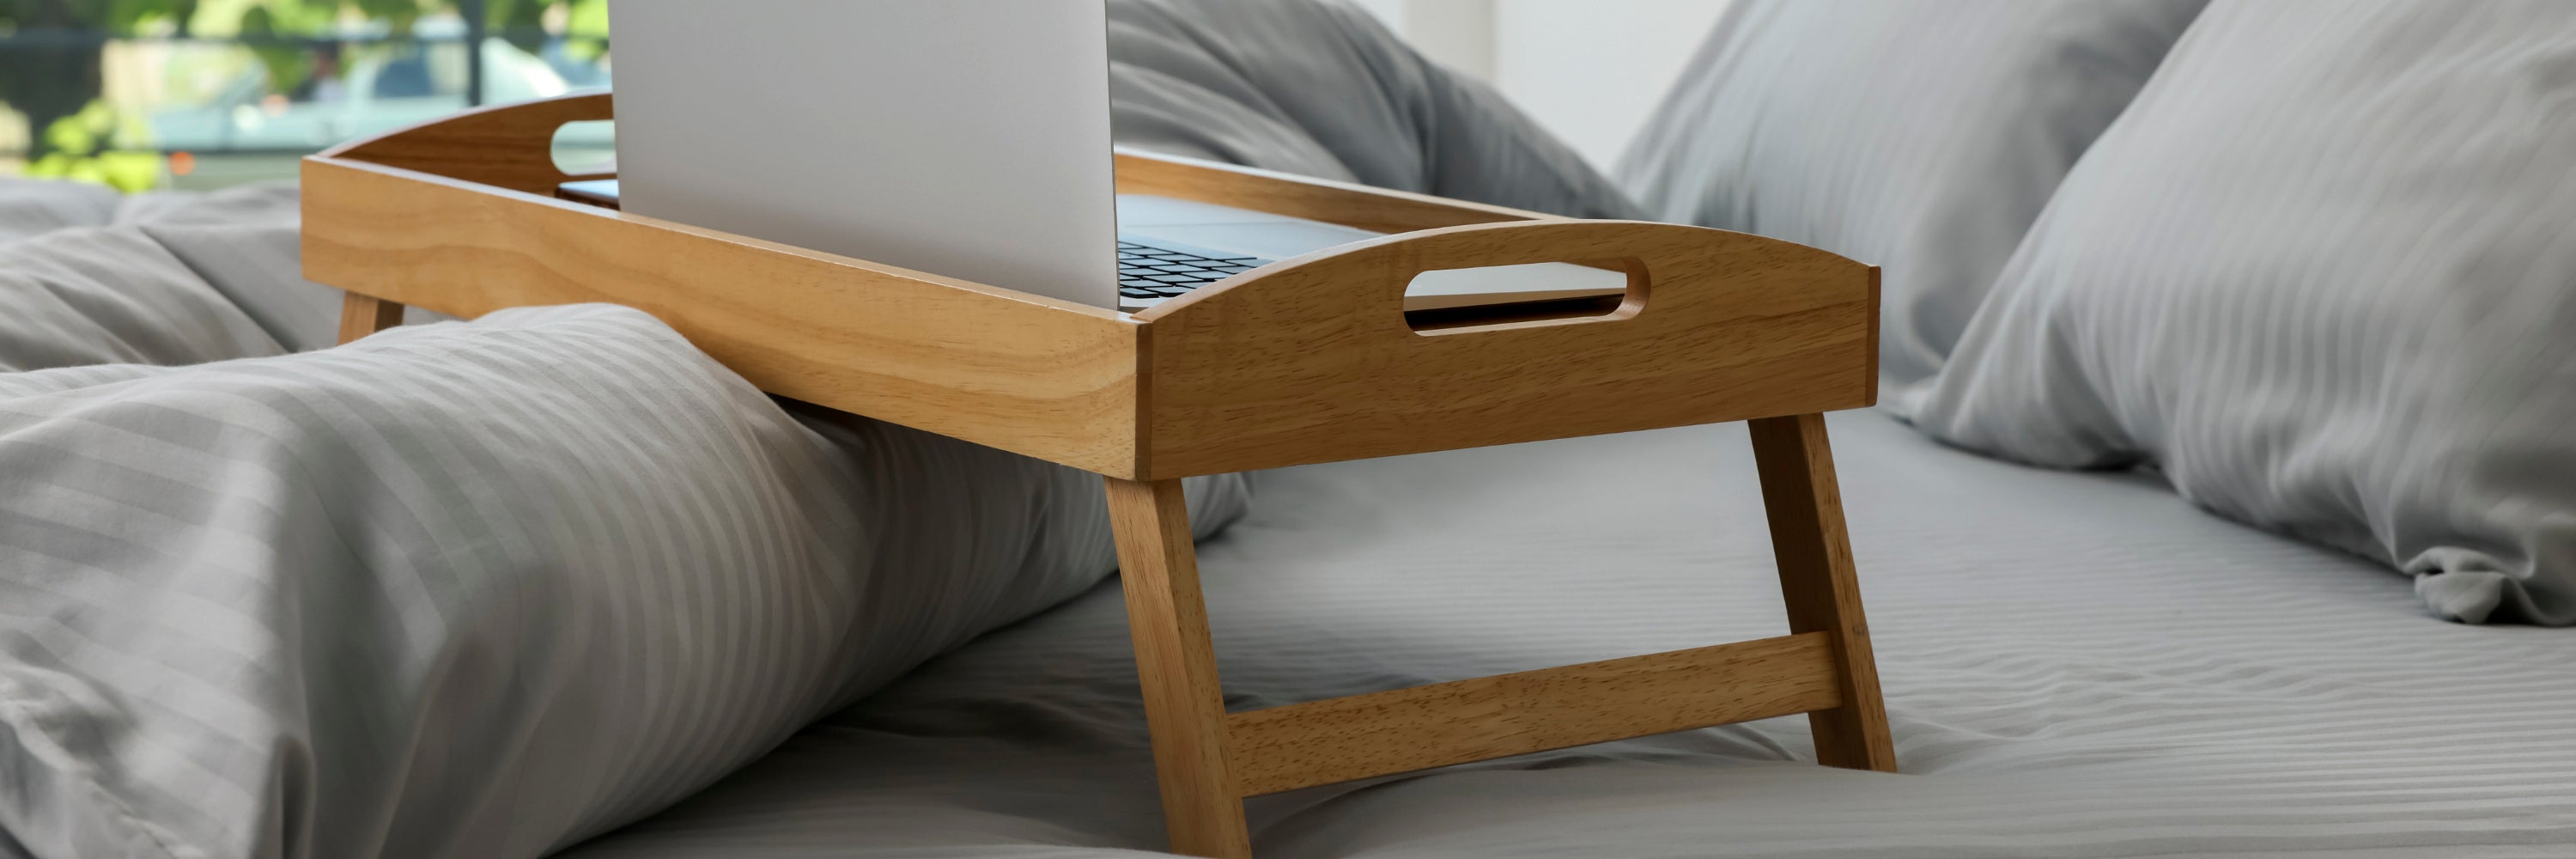 Bed Laptop Tables